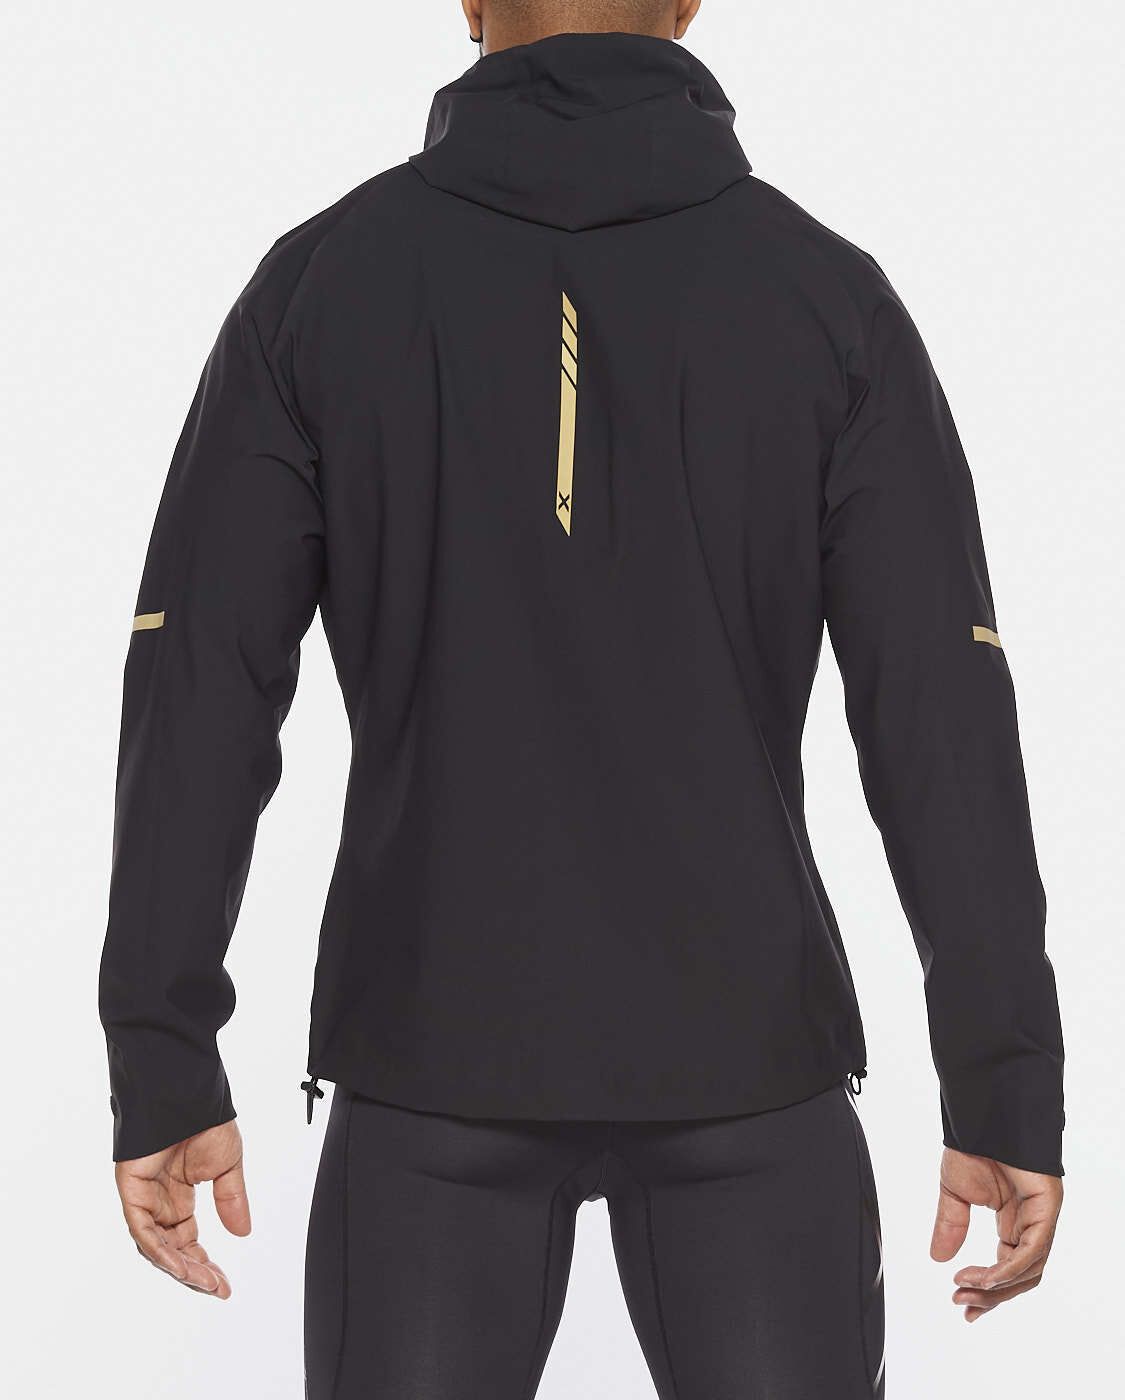 2XU GHST WP Reflective Jacket - Black/Gold - Cyclop.in